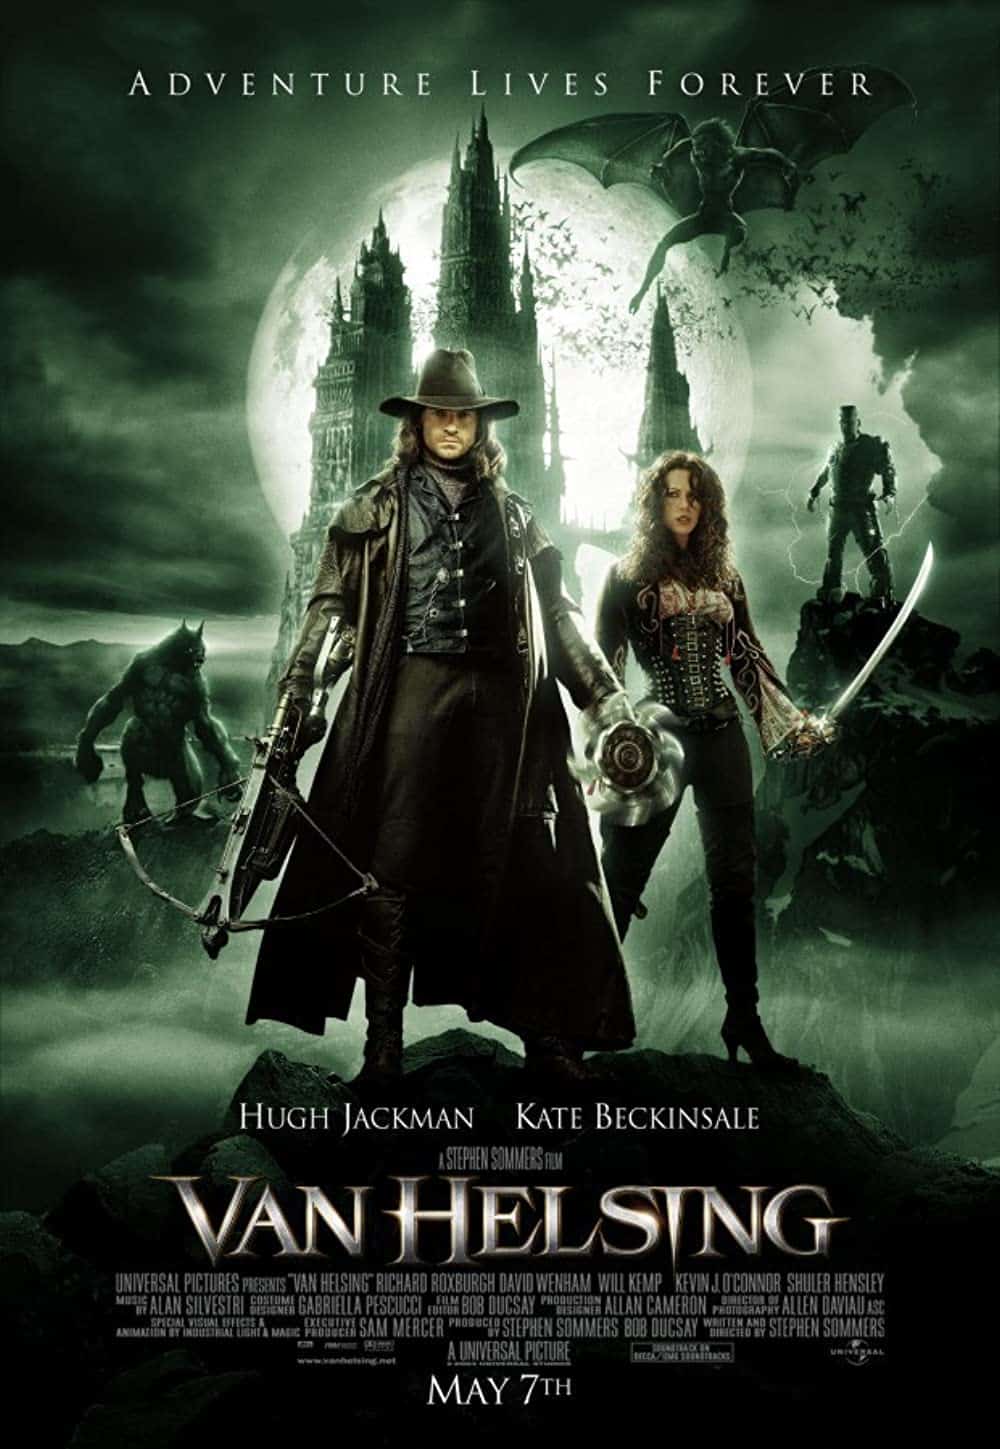 Van Helsing (2004) 15 Best Steampunk Movies to Check Out